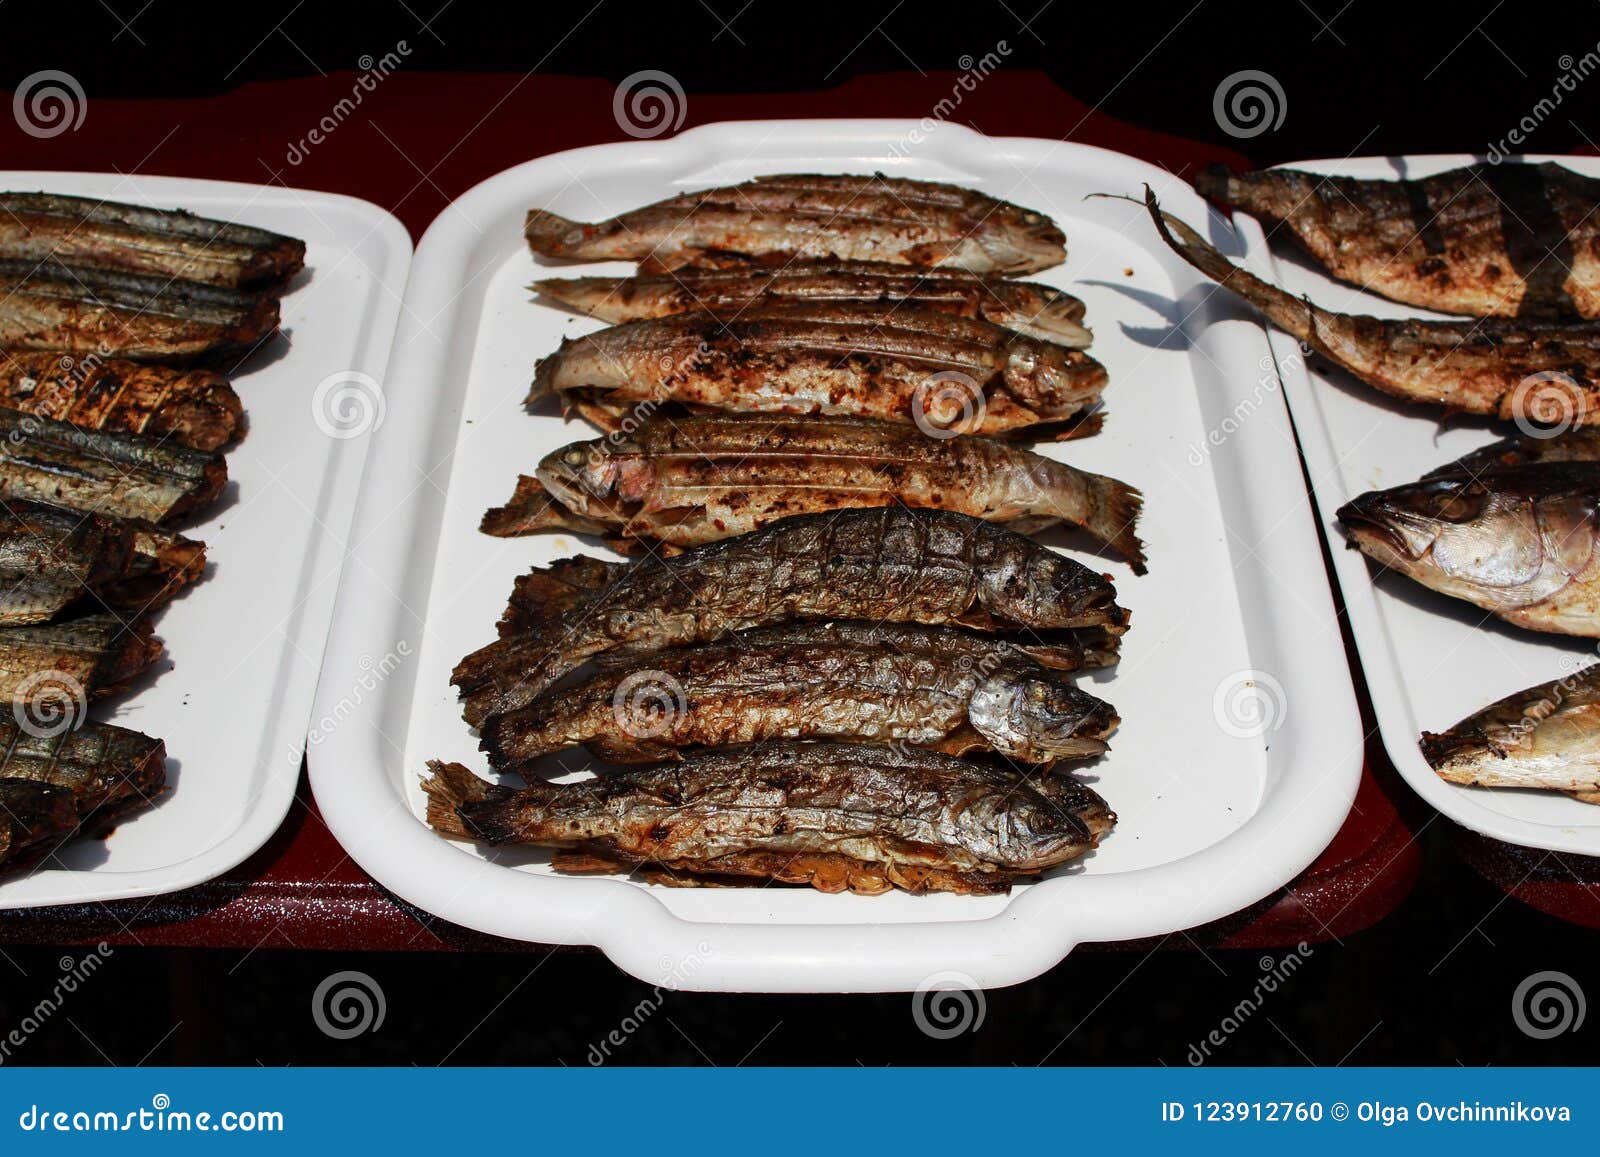 Fried Fish Cooked Entirely On An Open Fire On The Embankment Near The Black Sea On The Grill ...